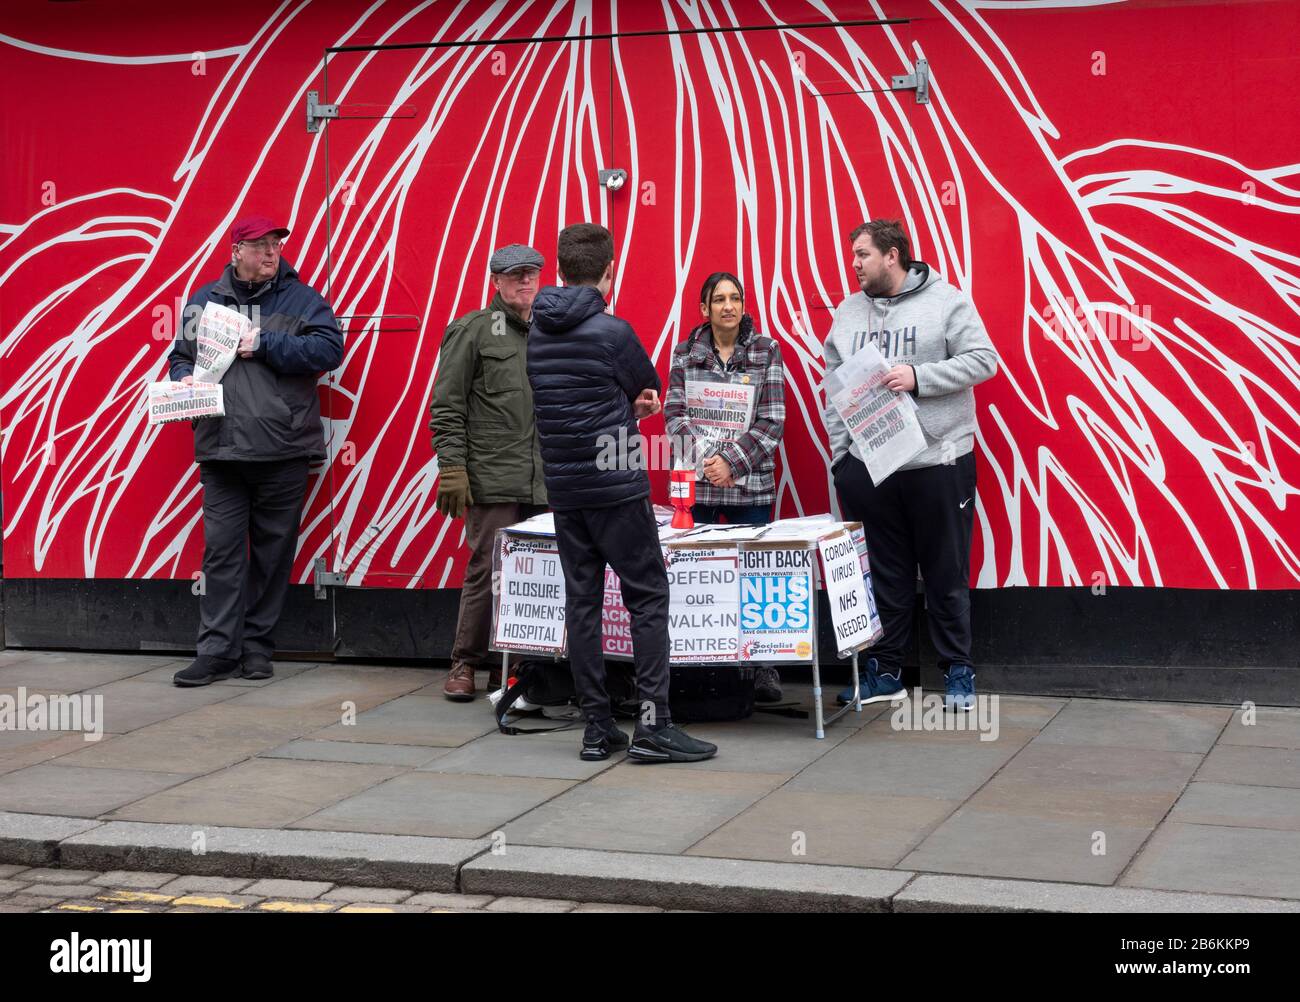 A group promoting and supporting The Socialist newspaper and political party in Liverpool Stock Photo